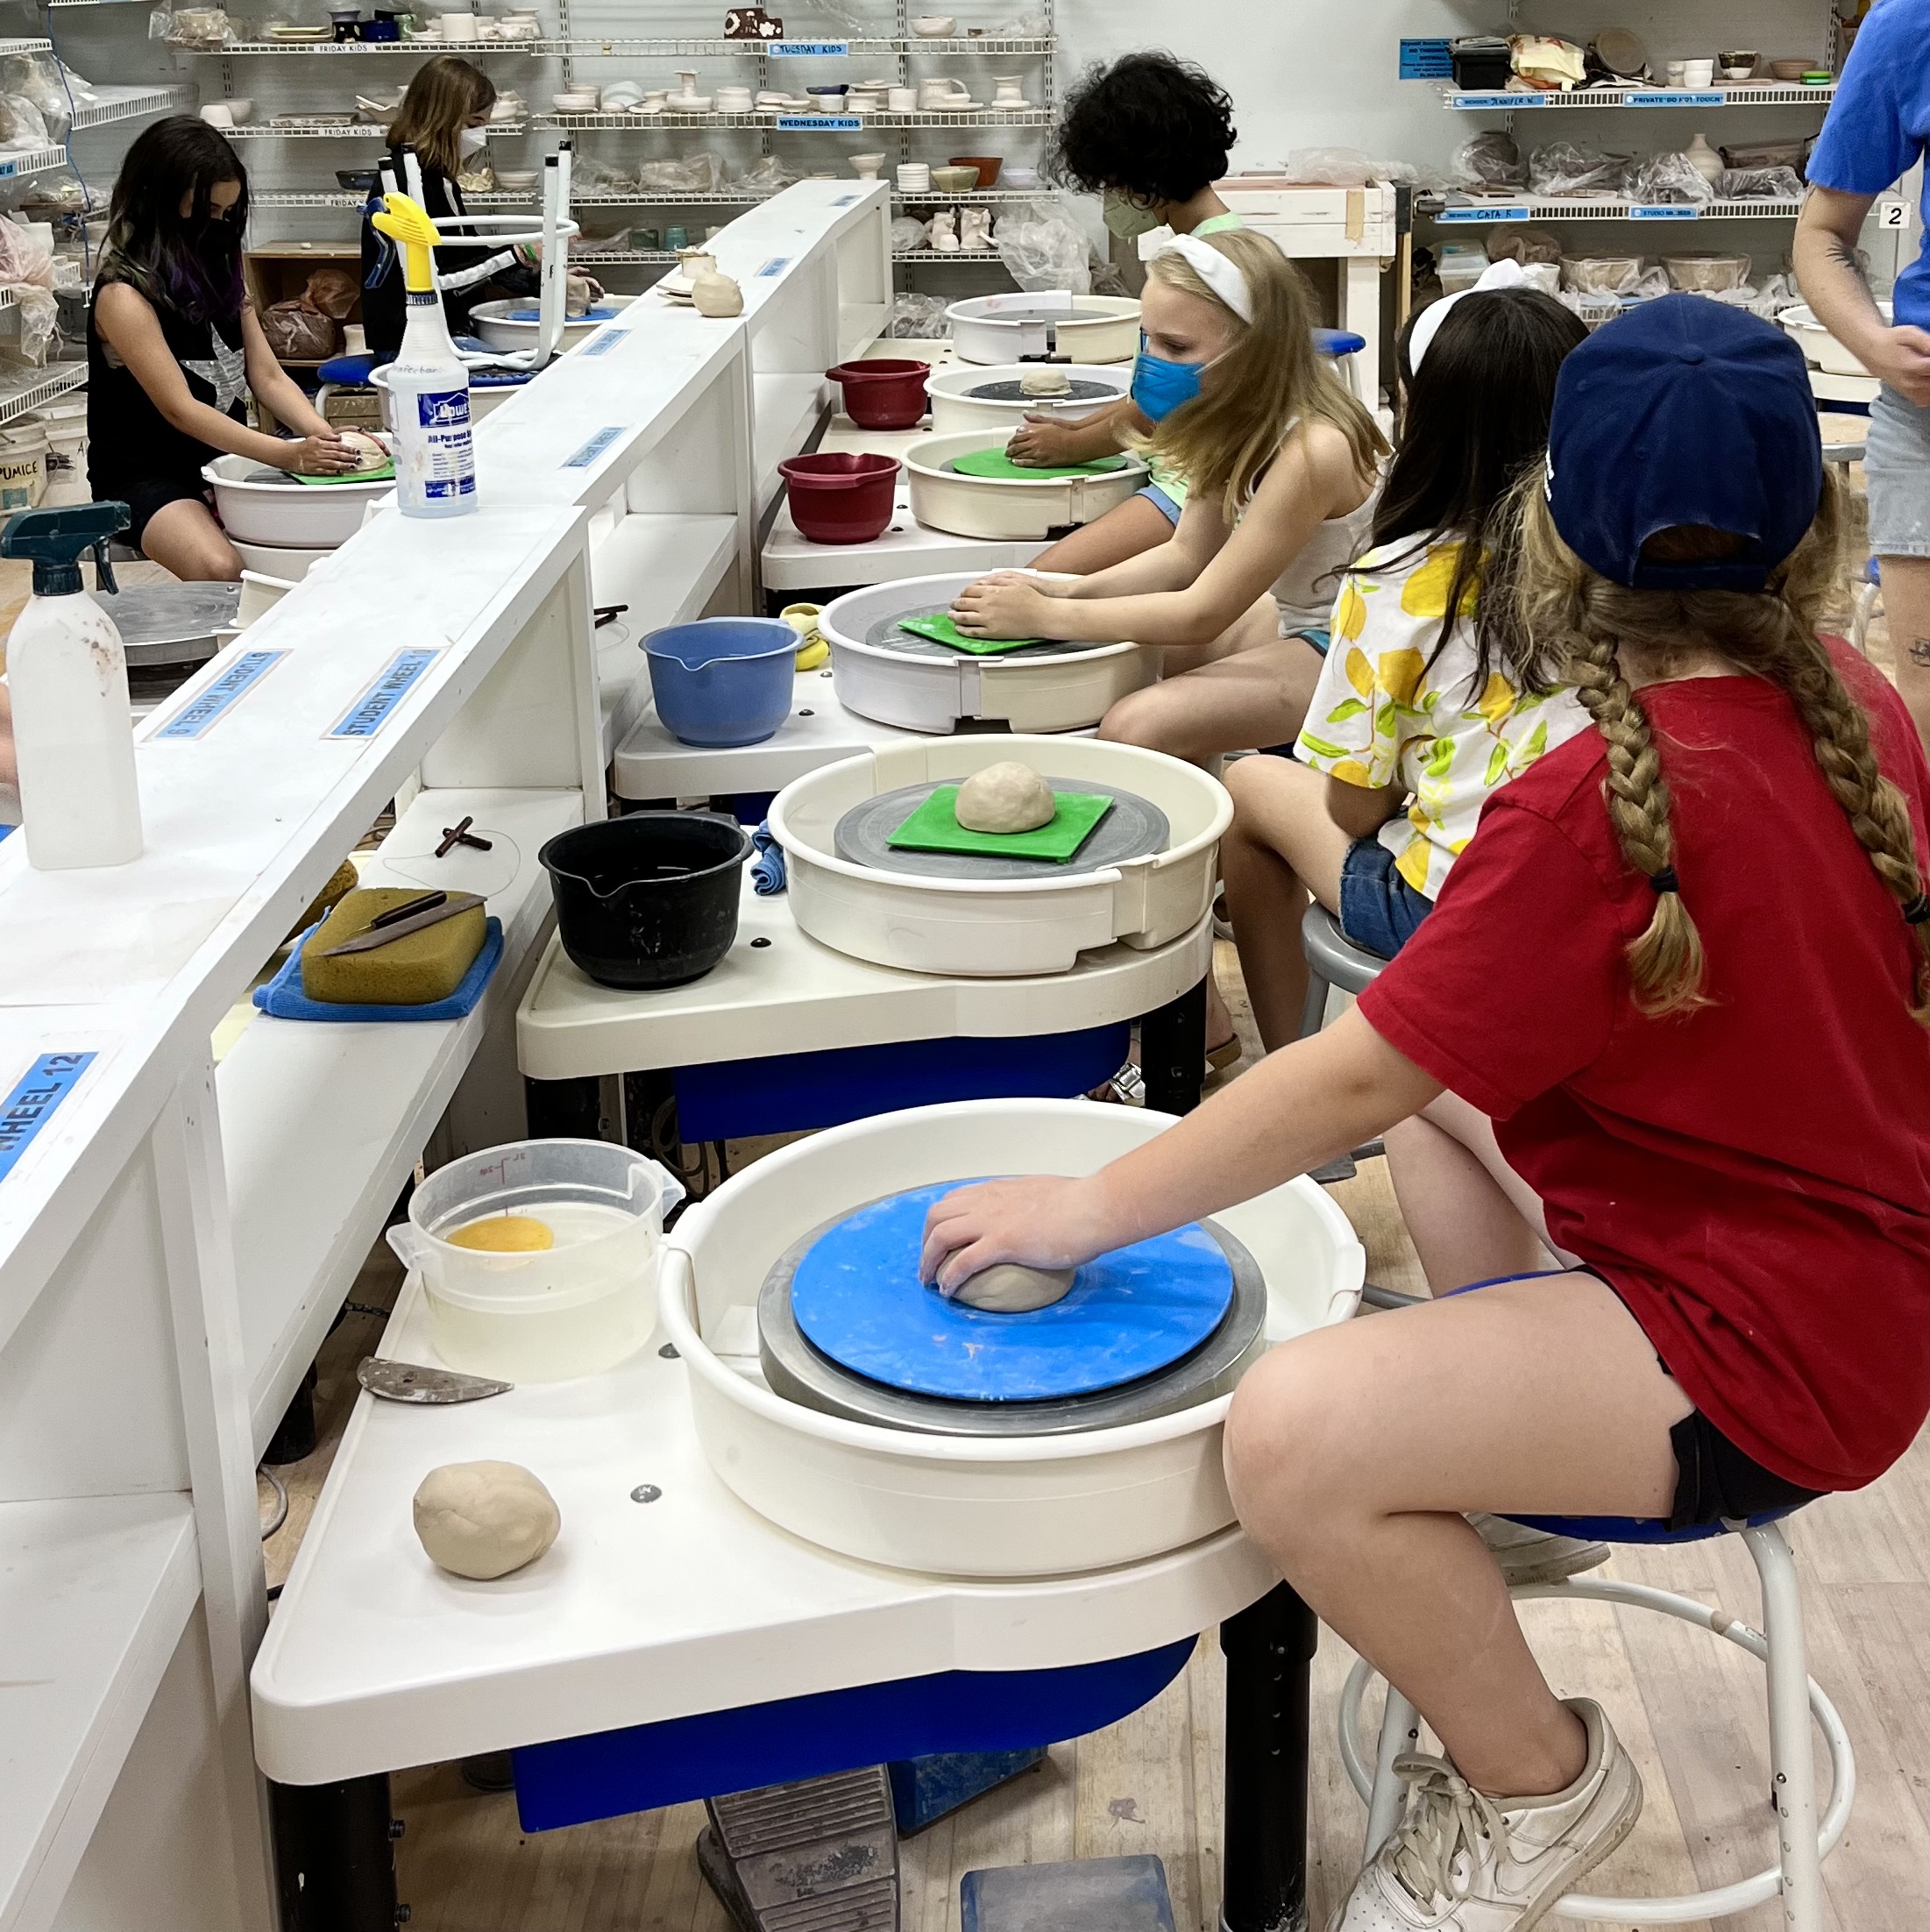 Tap Into Your Inner Ceramics Artist At Pottery Studio 1